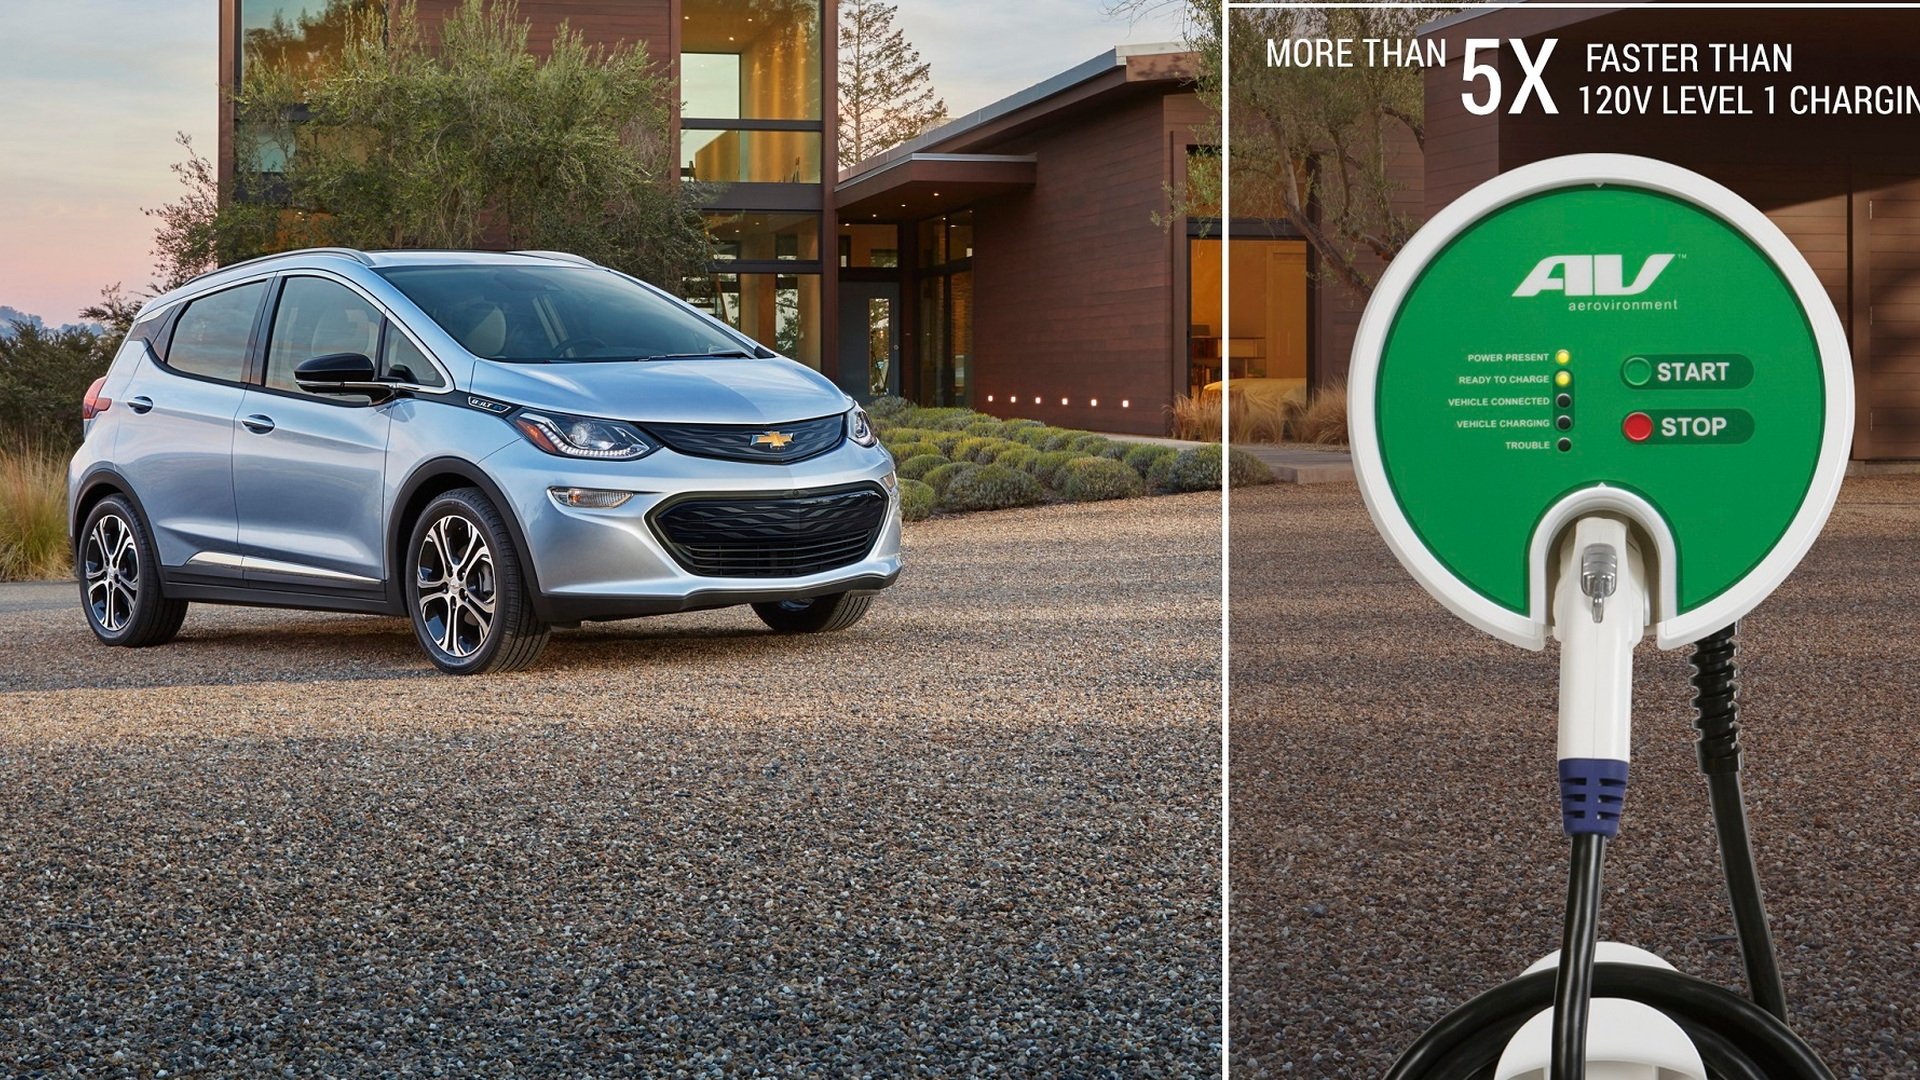 2017 Chevrolet Bolt EV electric car with Aerovironment EVSE-RS charging station